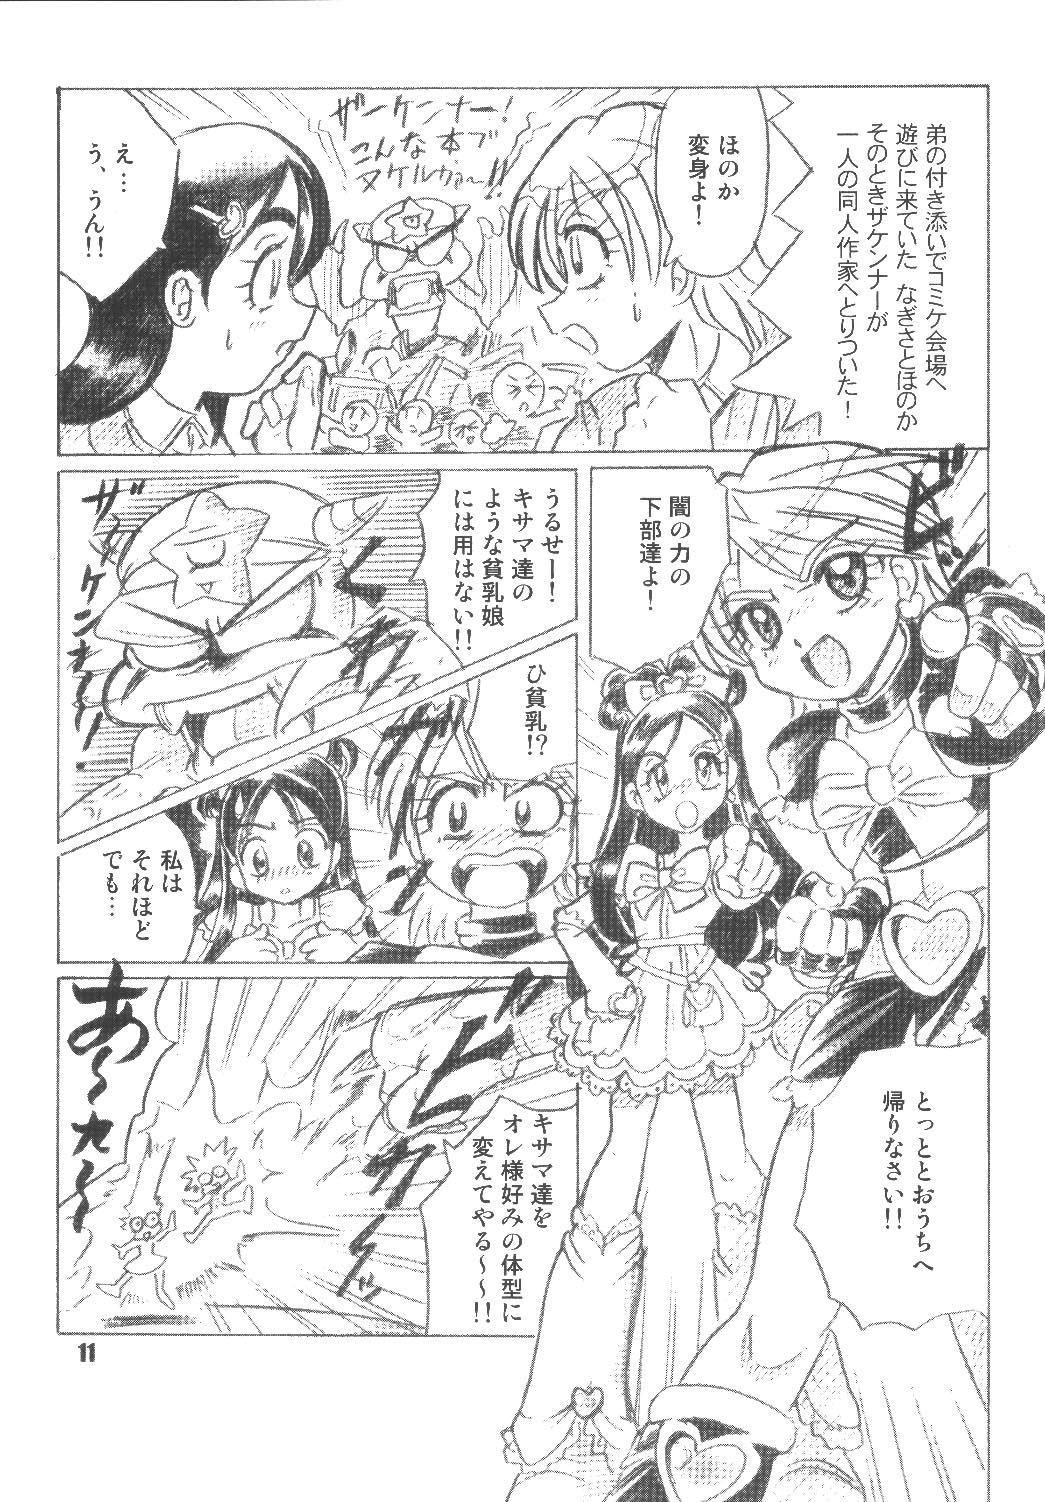 Amateurs Gone Wild ぶっちゃけありえちゃった - Pretty cure 18 Year Old Porn - Page 11